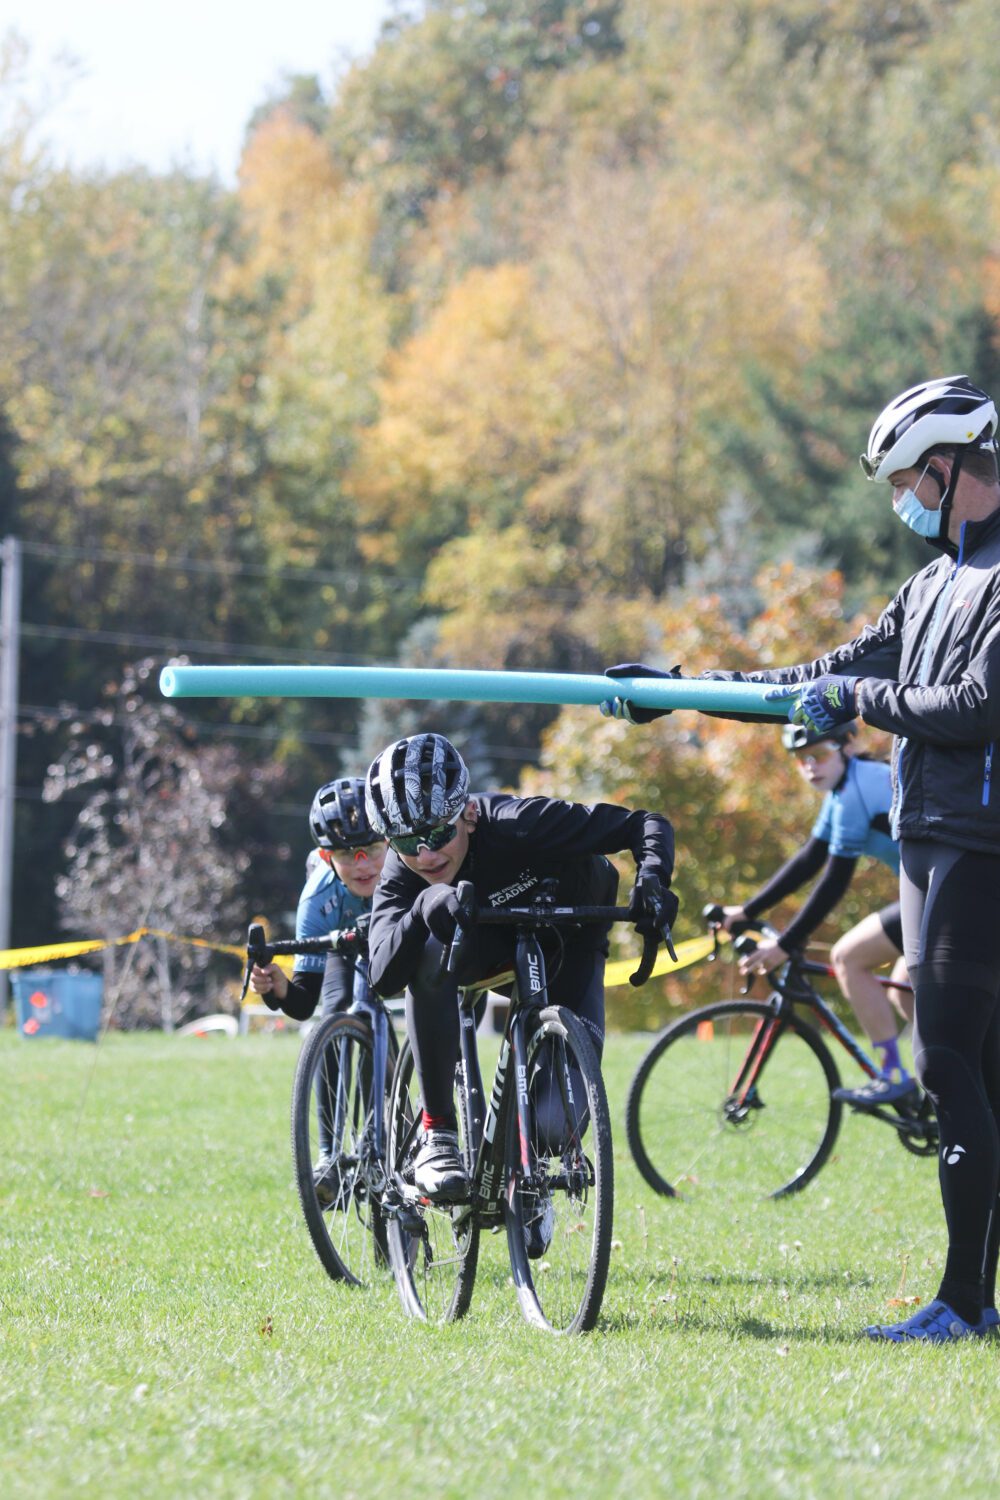 Cyclists participate in a race on grass while a person wearing a mask and holding a foam pool noodle stands nearby. The cyclists are bent over their handlebars, and trees with autumn foliage are visible in the background.